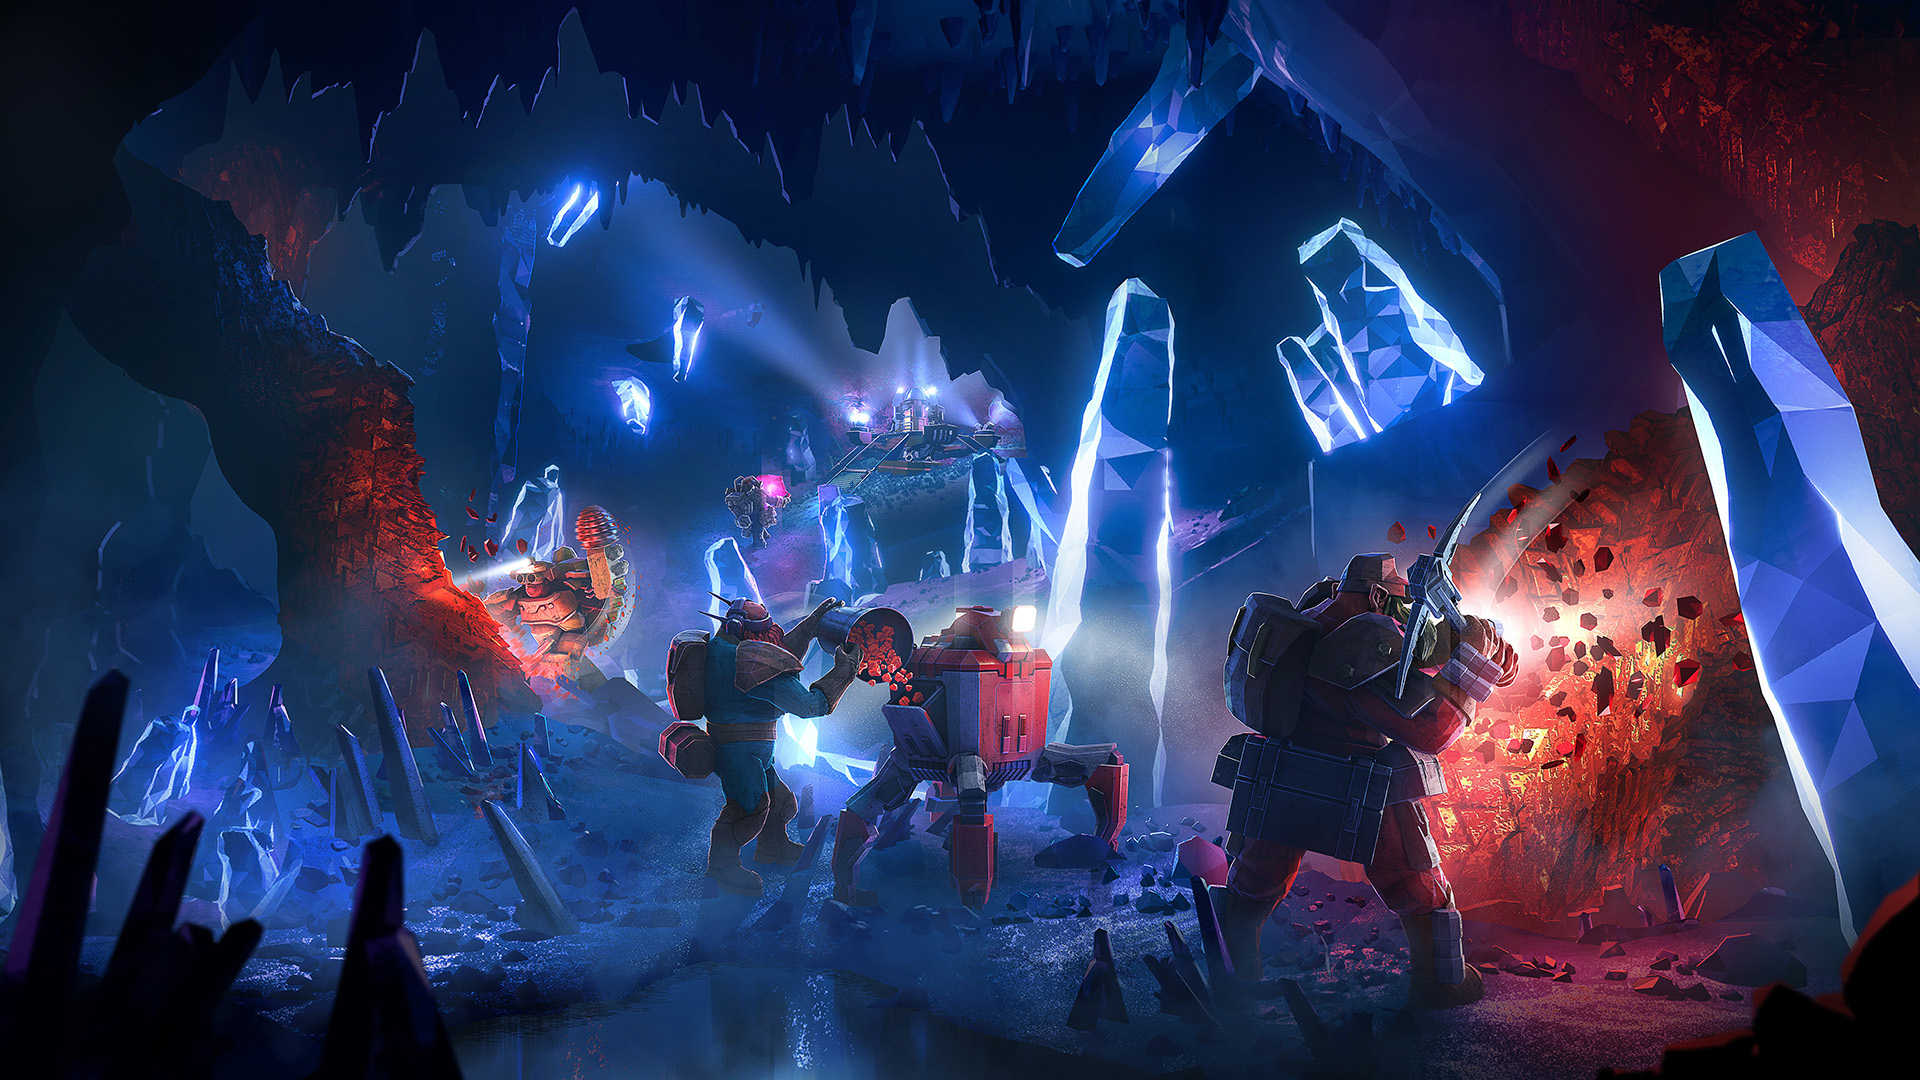 Dwarves mining a crystalline cavern together in Deep Rock Galactic.